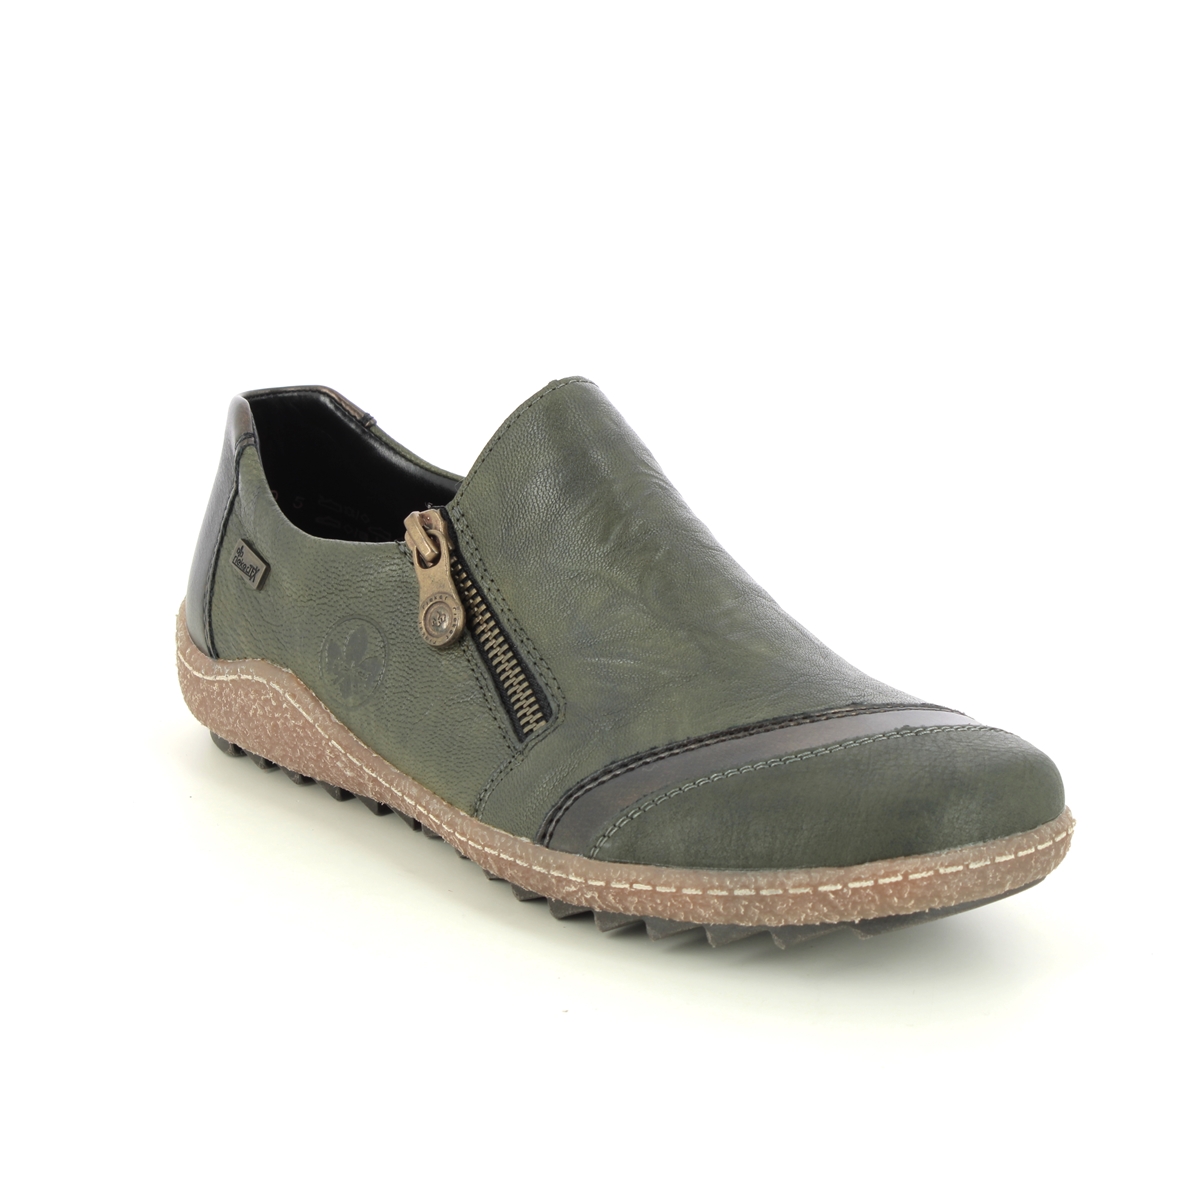 Rieker Zigshu Tex Olive Leather Womens Comfort Slip On Shoes L7571-54 In Size 42 In Plain Olive Leather